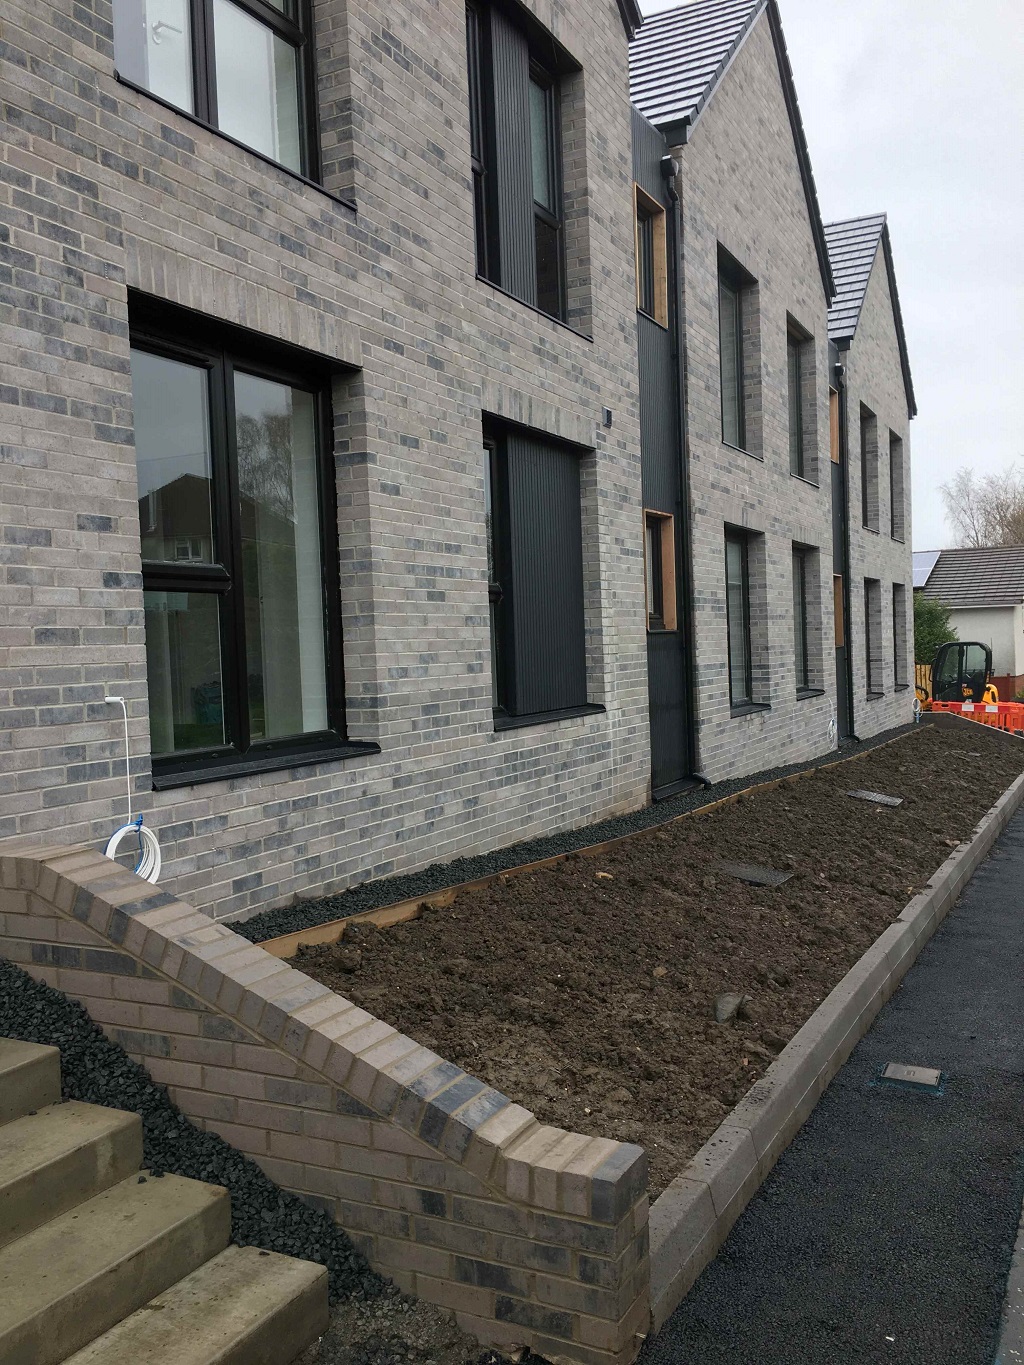 Barnardo's unveils Stirling homes for young people leaving care